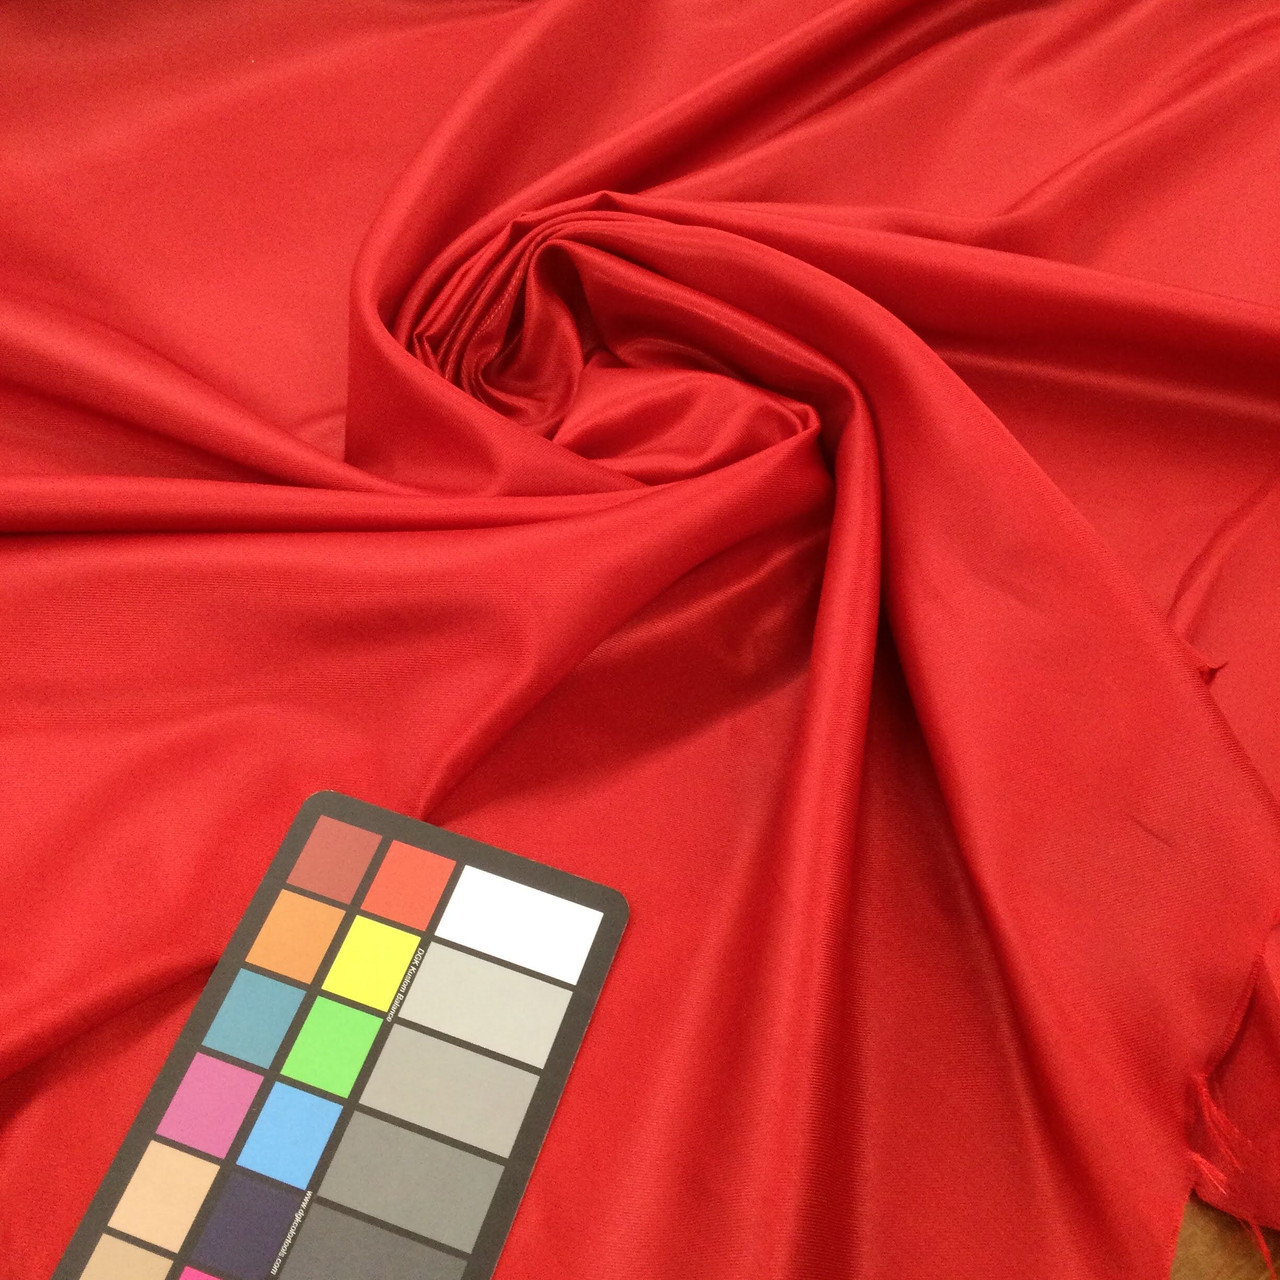 Bright Red Polyester Satin Lining Fabric / Bias Stripe Texture